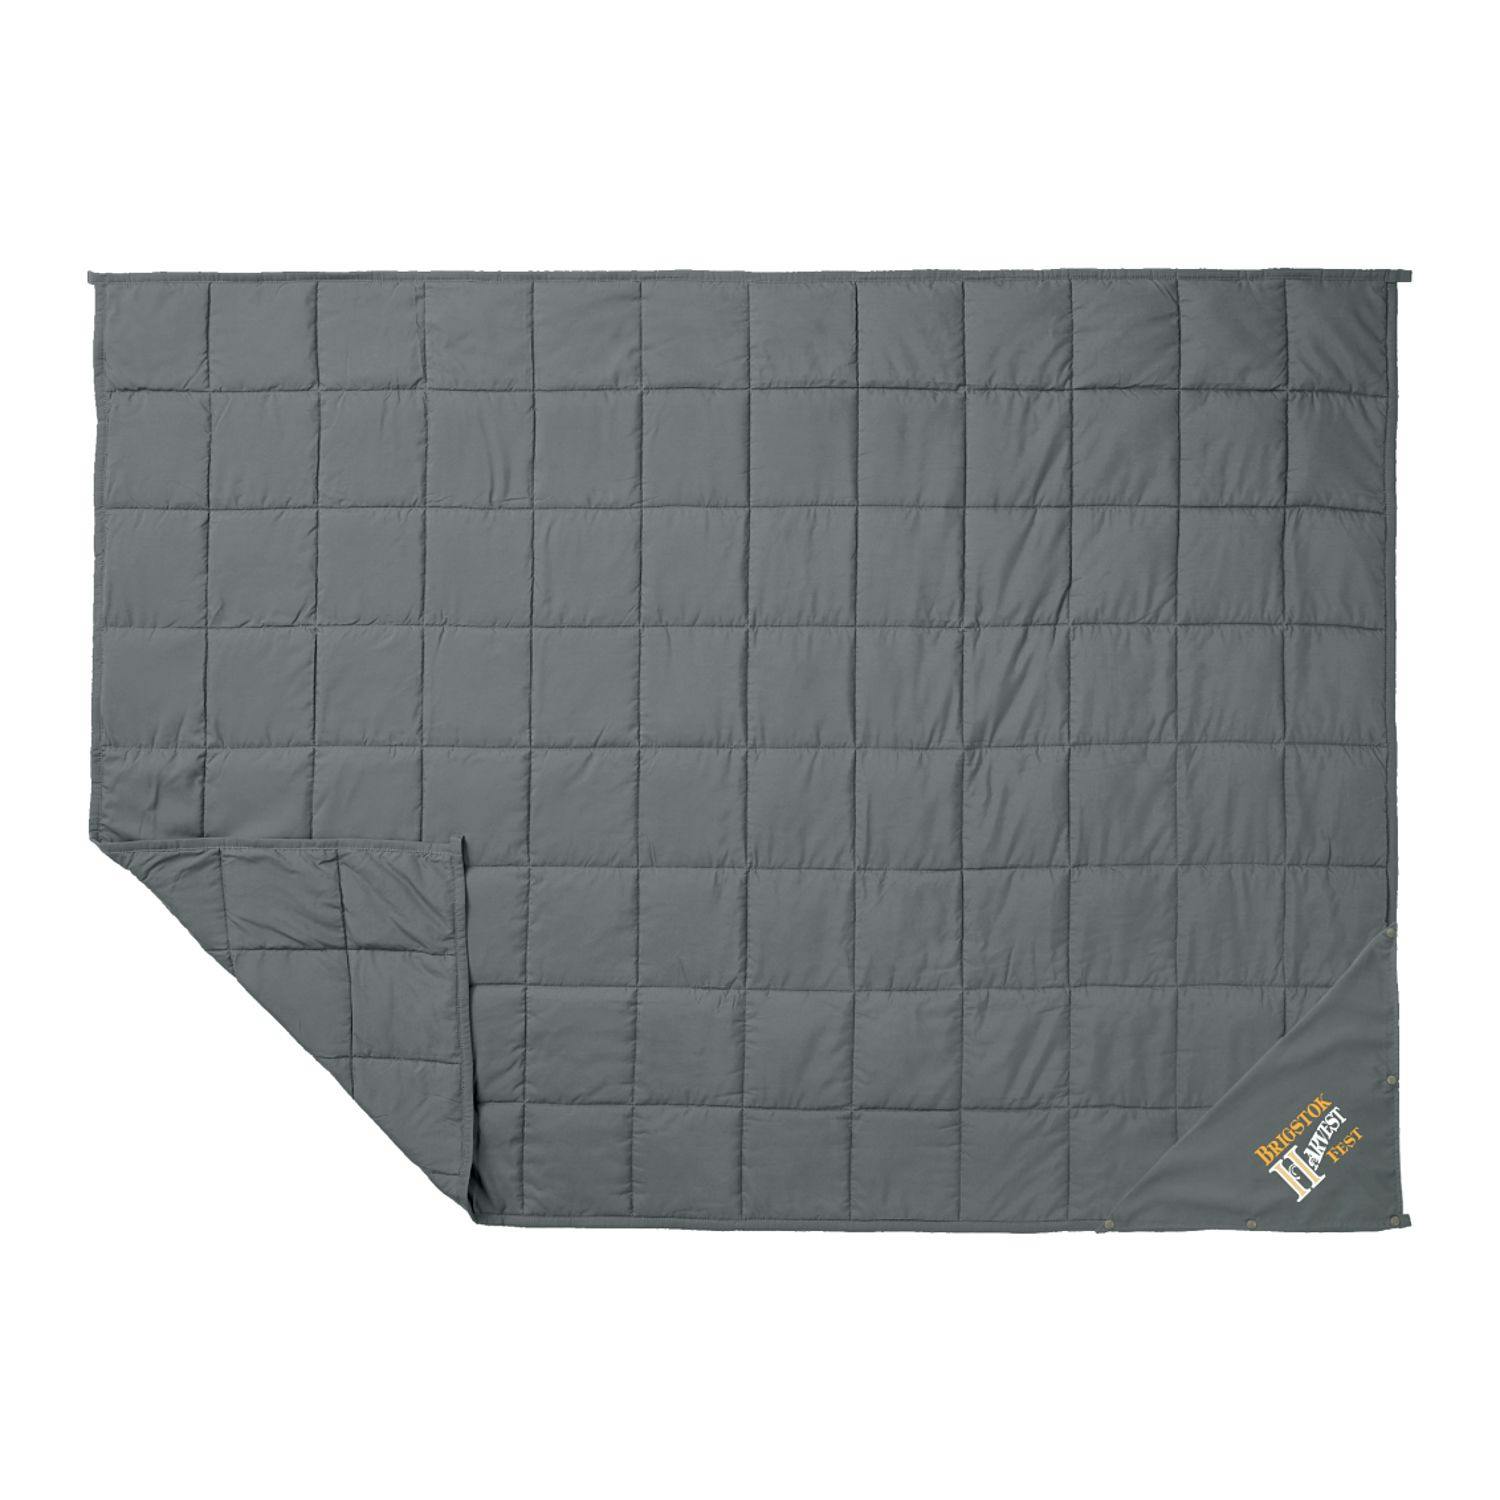 Zen 12lb Weighted Blanket - additional Image 1